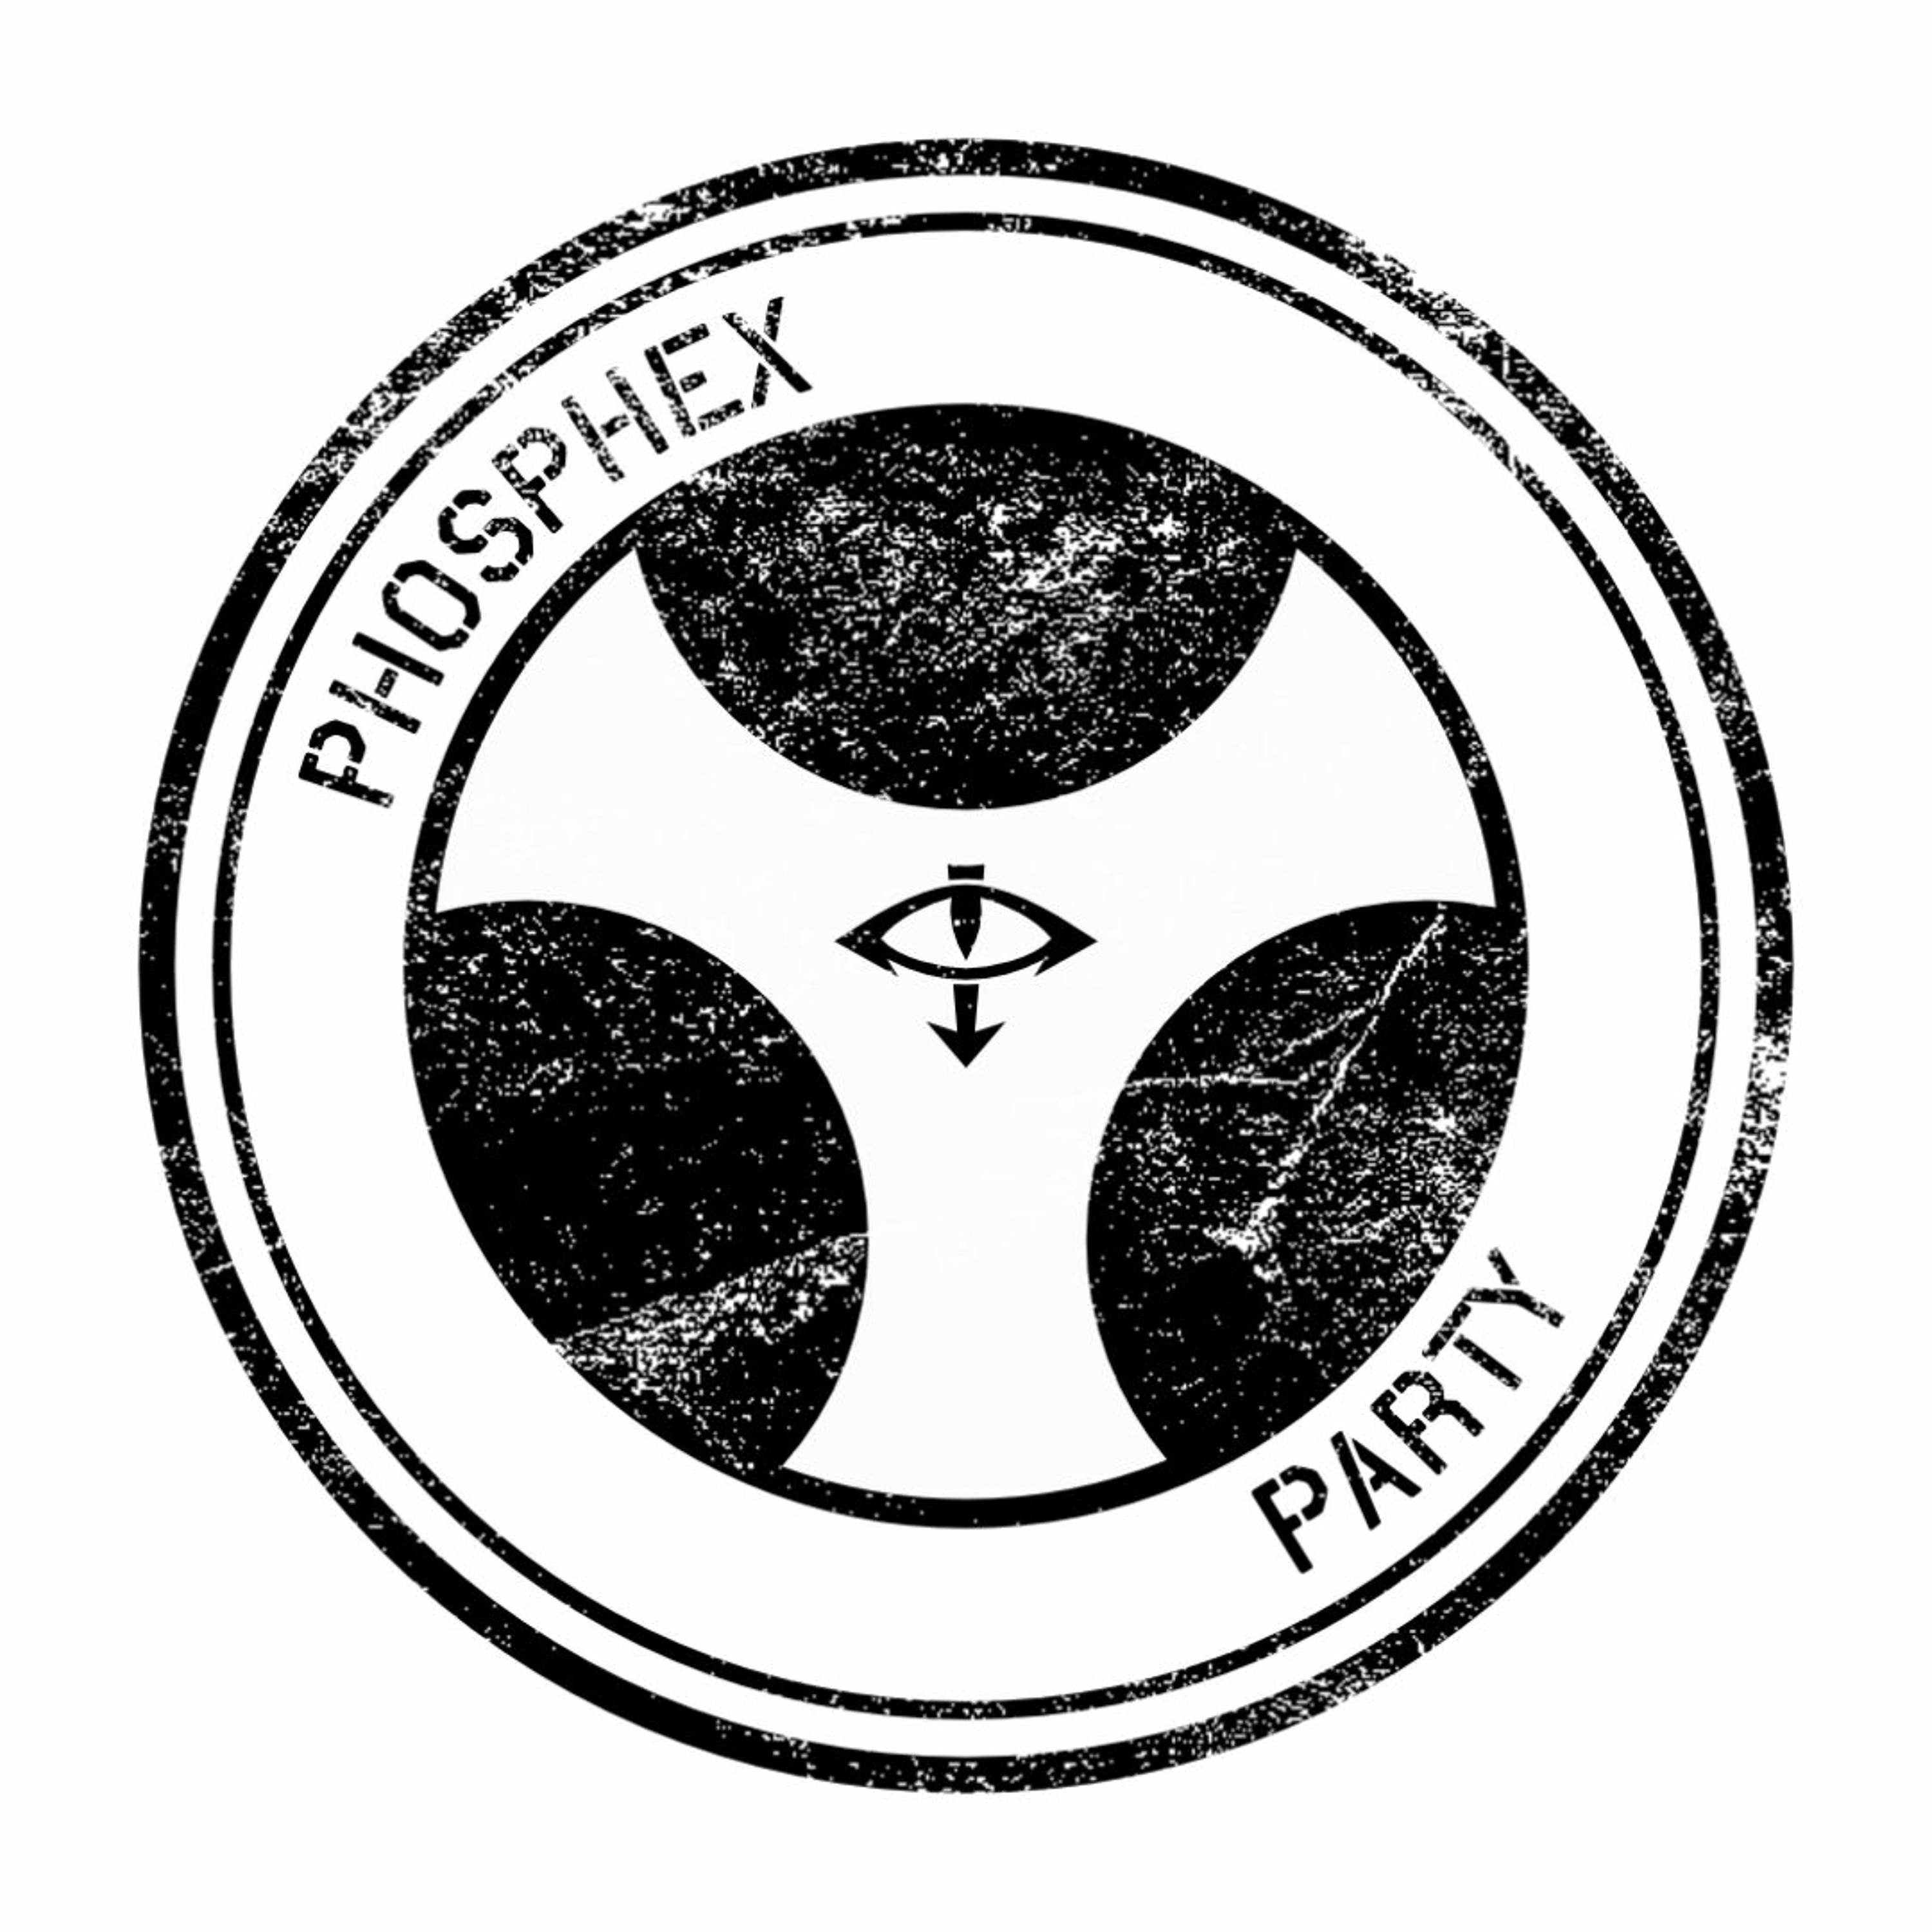 Phosphex Party Episode 26 - Heresy 2, Clapping MK6 Cheeks and Unusual Optimism